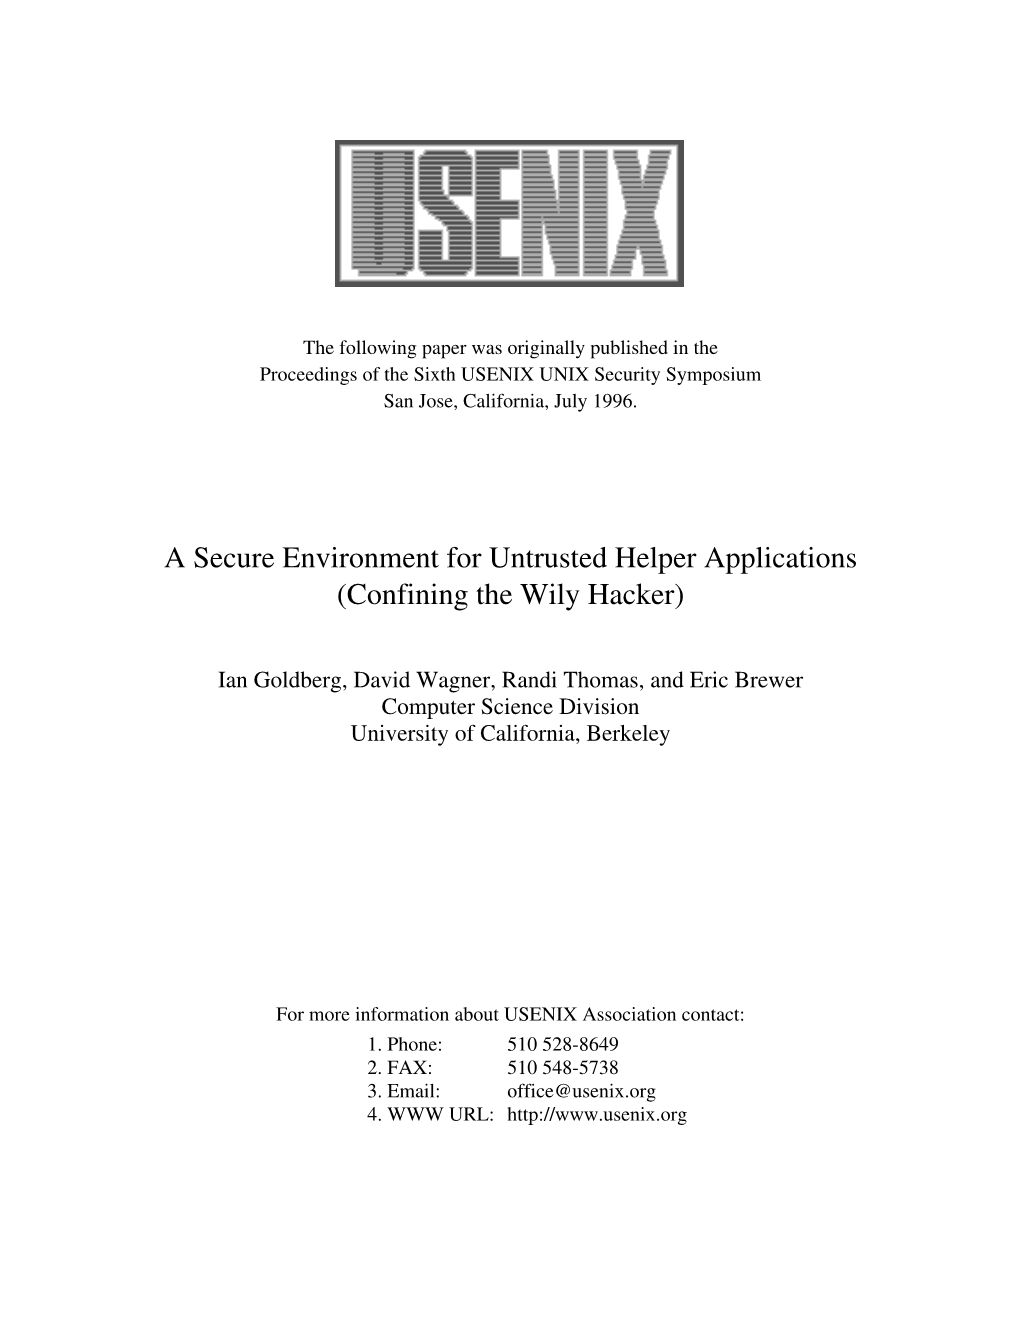 A Secure Environment for Untrusted Helper Applications (Confining the Wily Hacker)